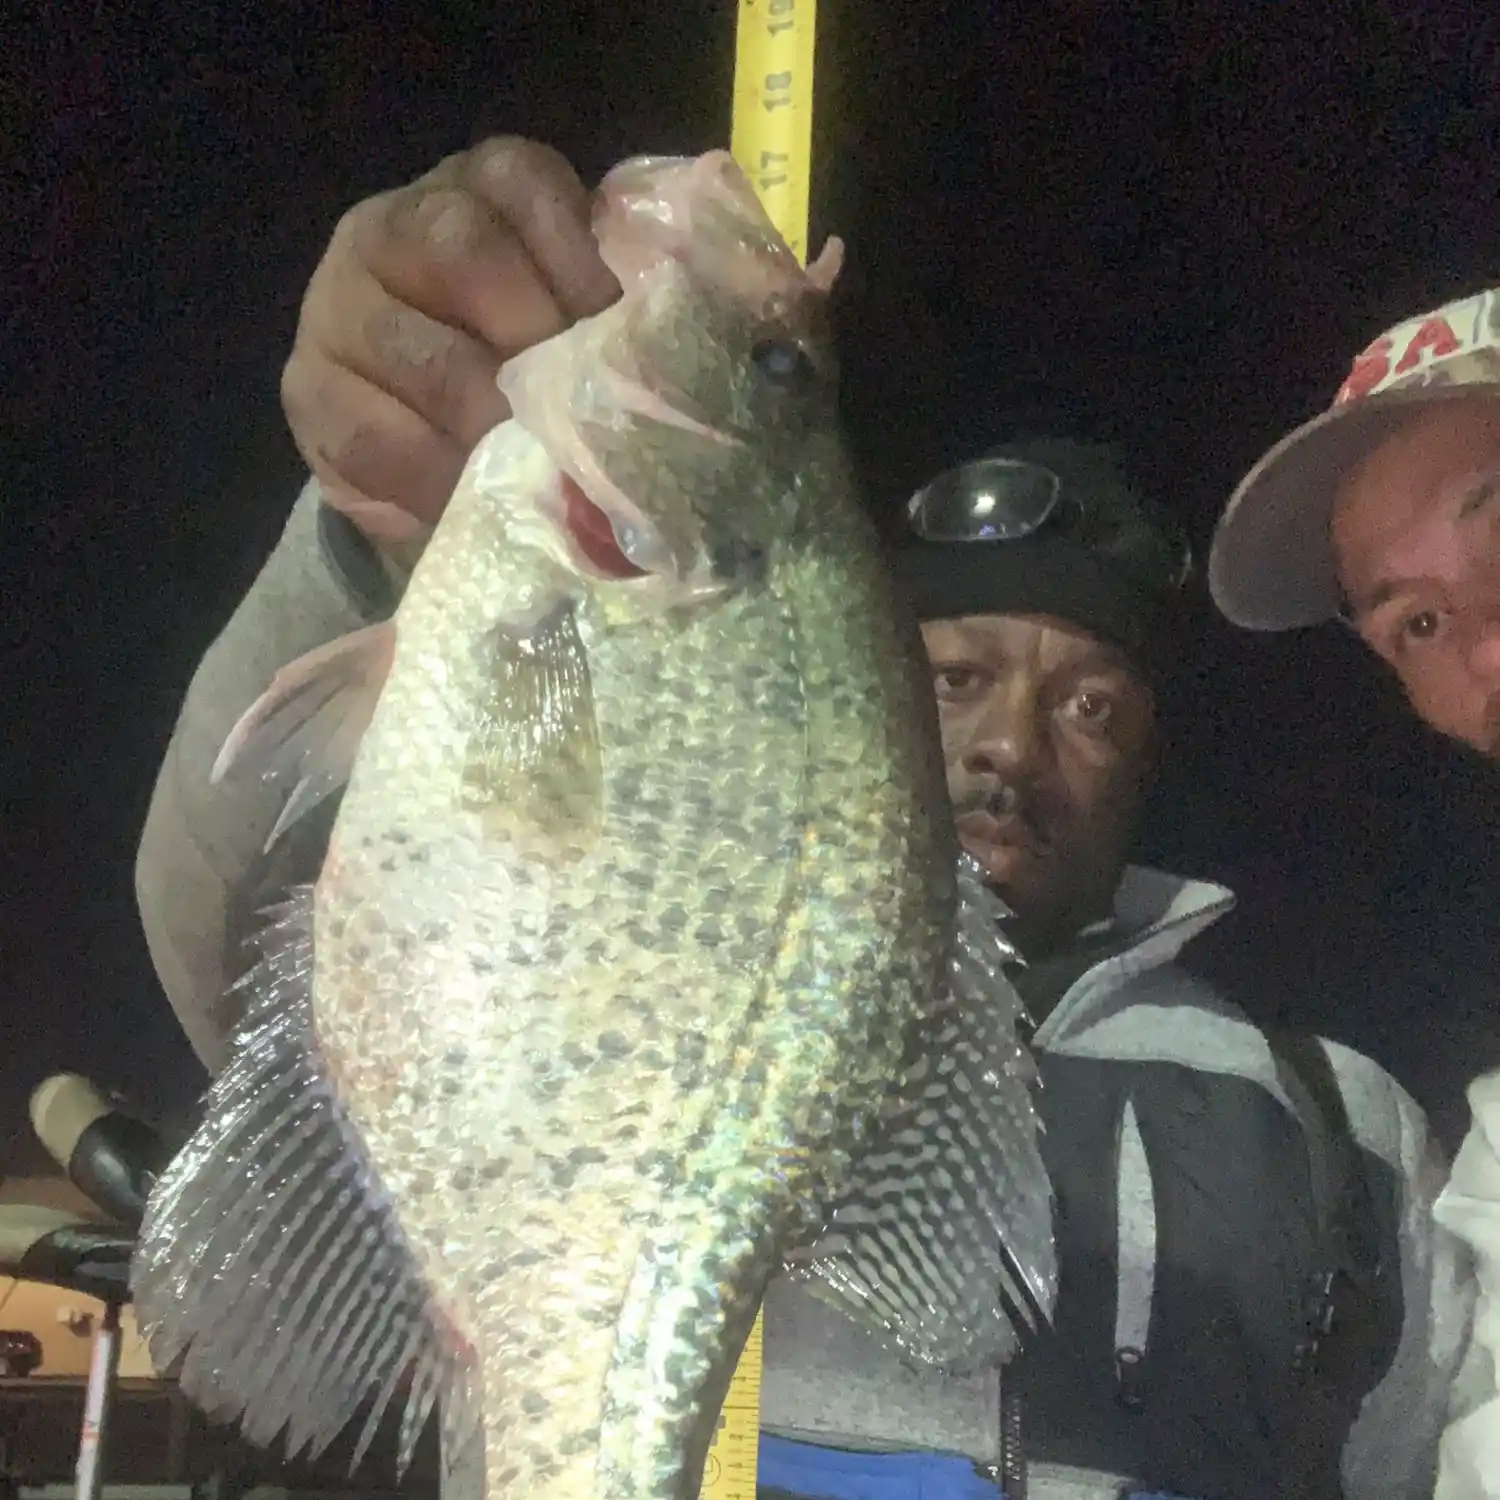 Going Deep to Catch Crappie